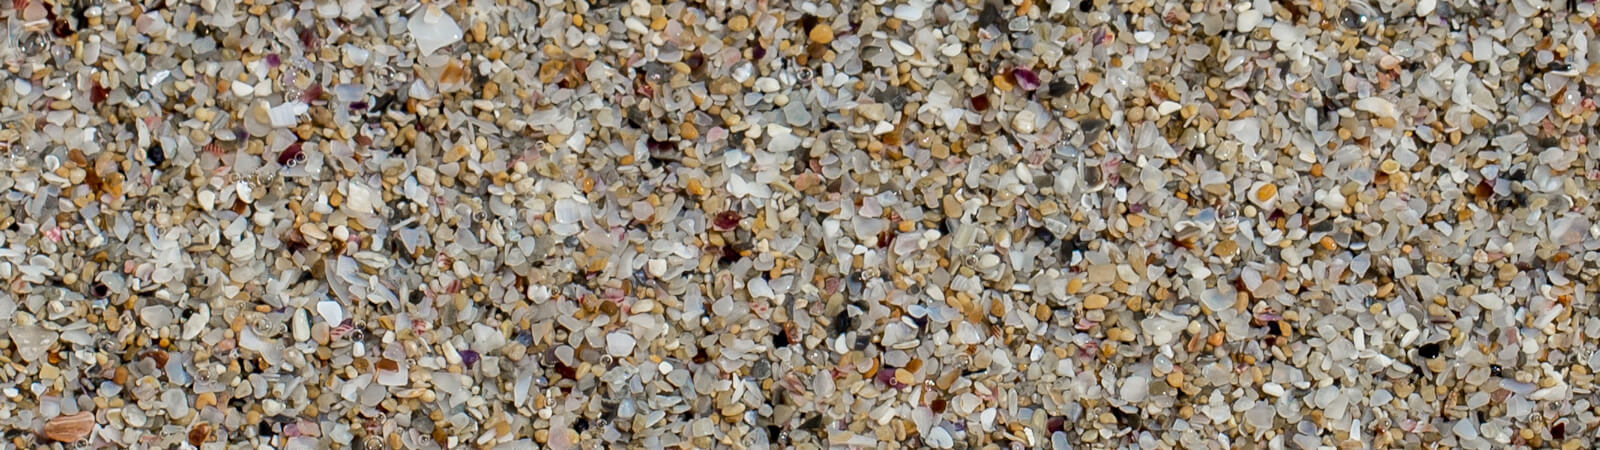 Are you looking for sand supplies?